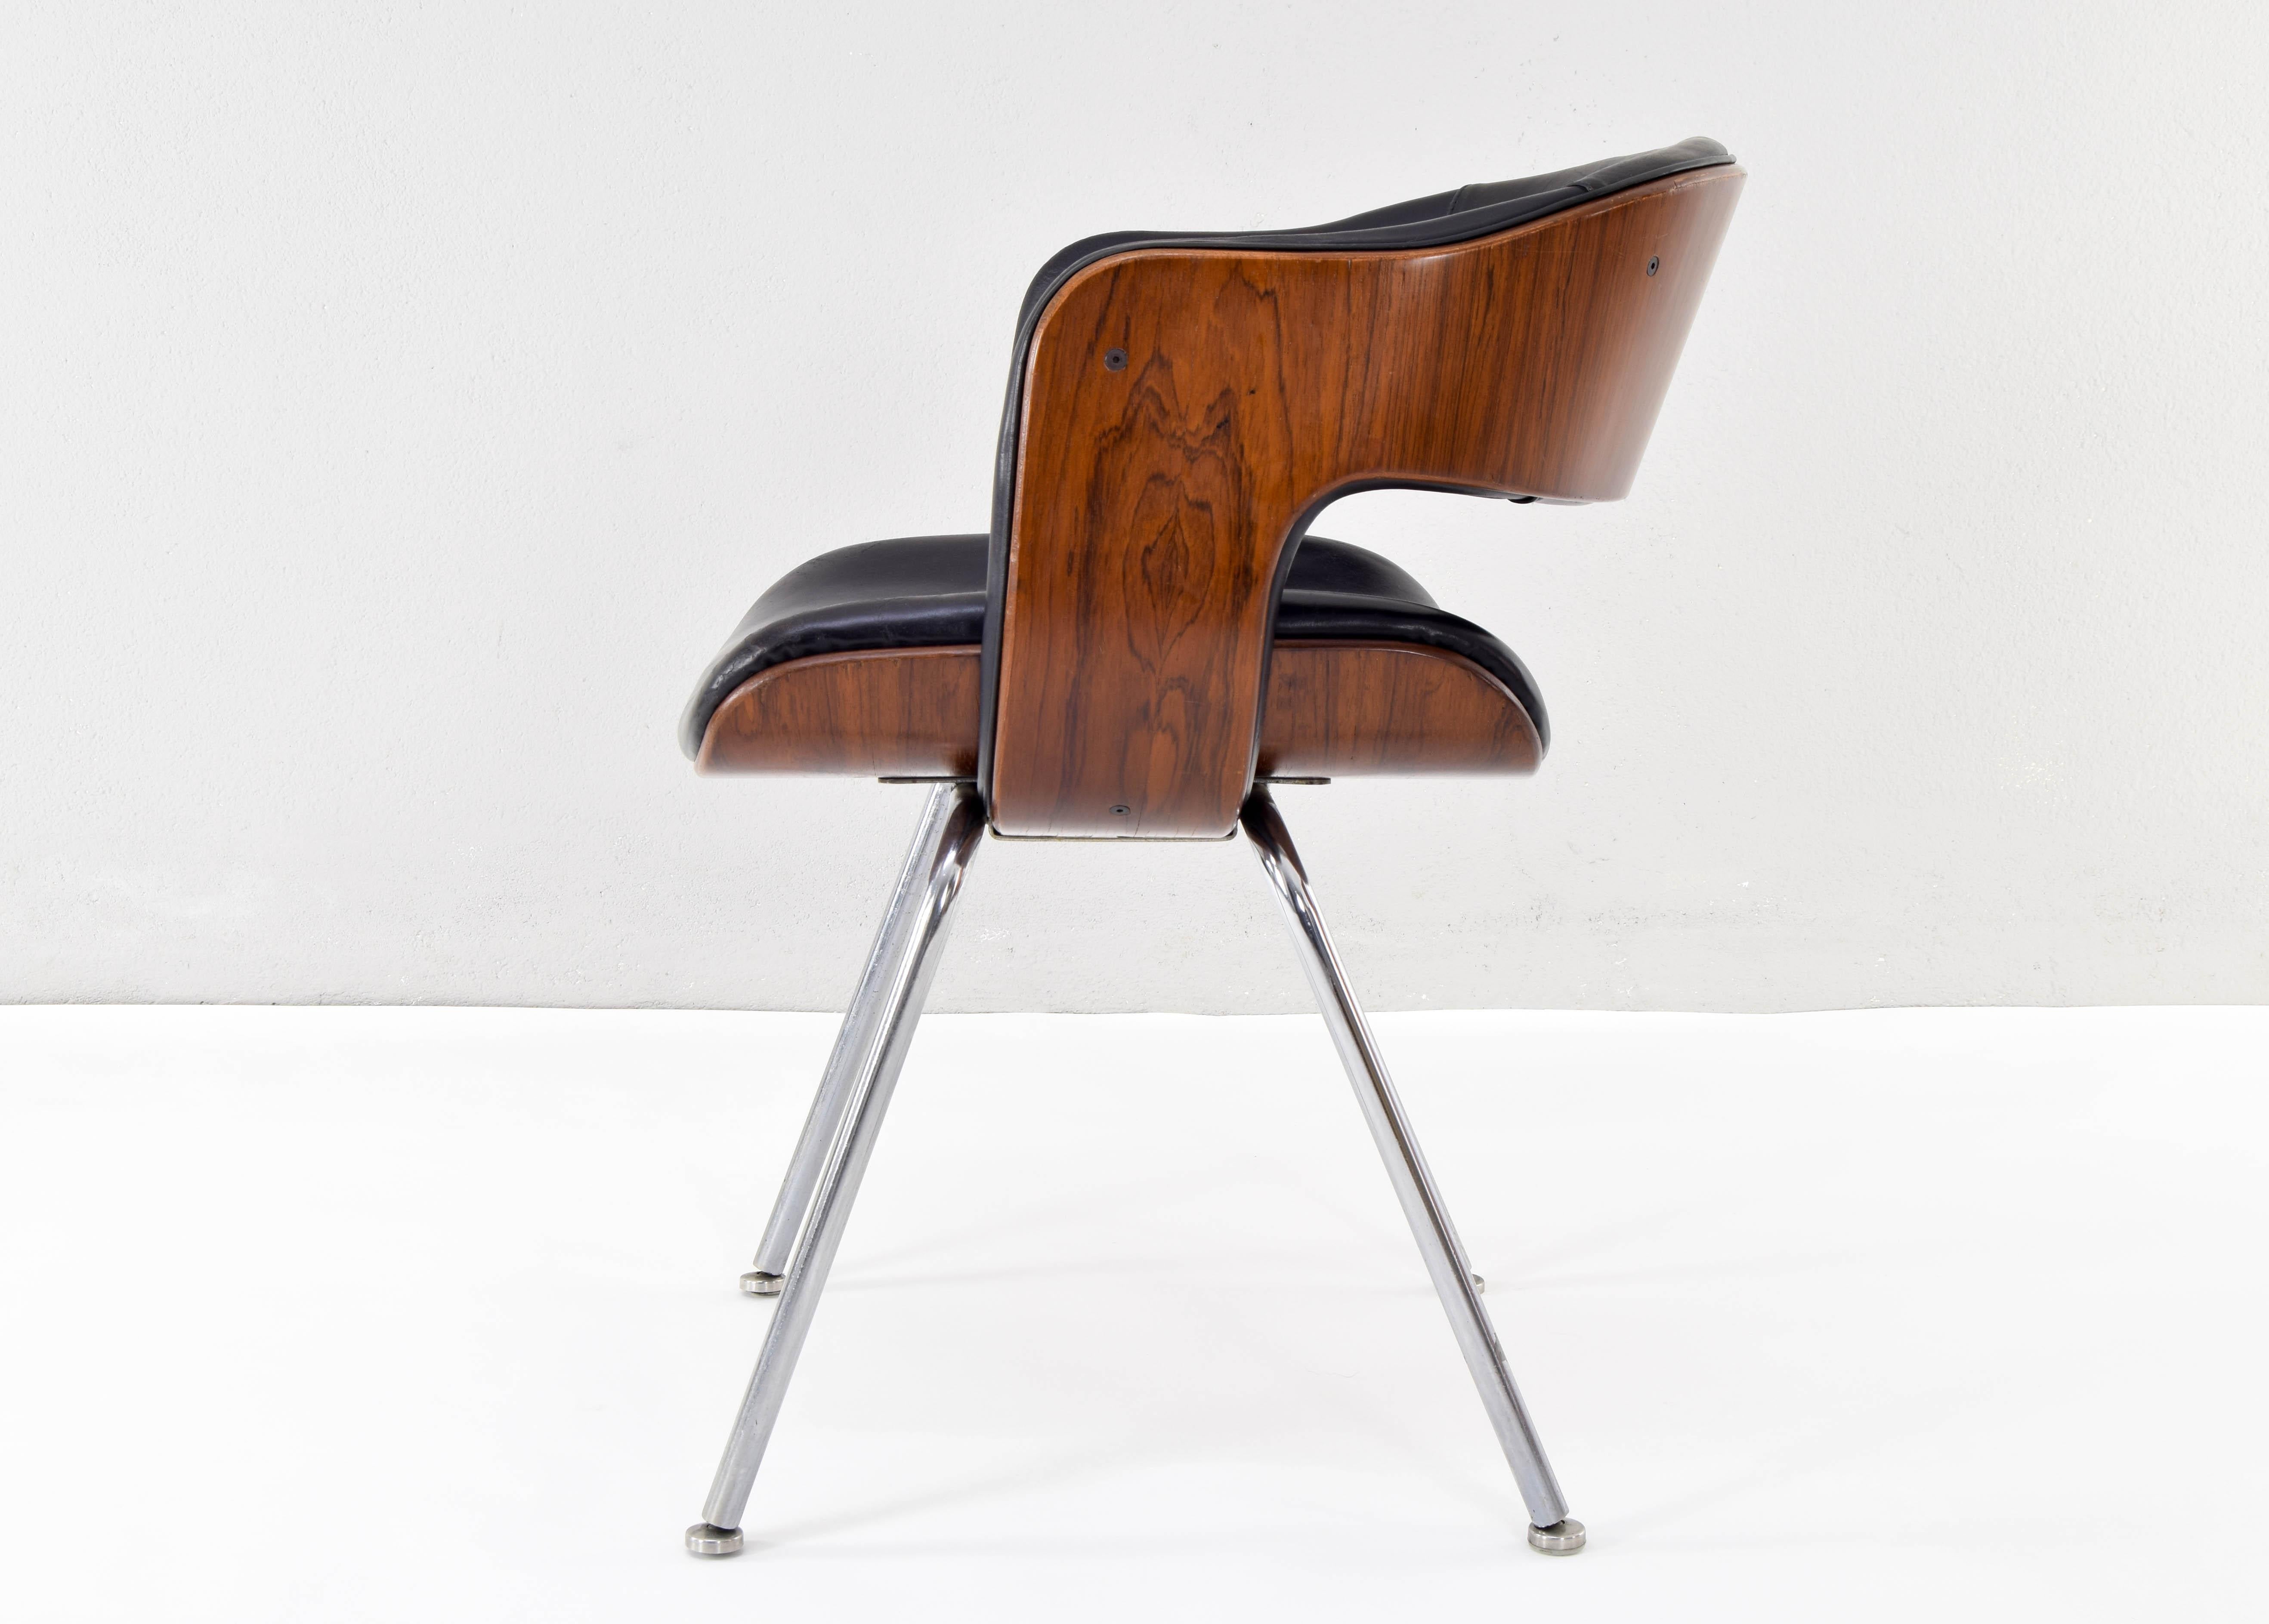 Oxford model armchair designed by Martin Grierson and produced by Arflex in 1963. Both the laminated wood structure and the black natural leather upholstery are in good condition although with the logical wear and tear of